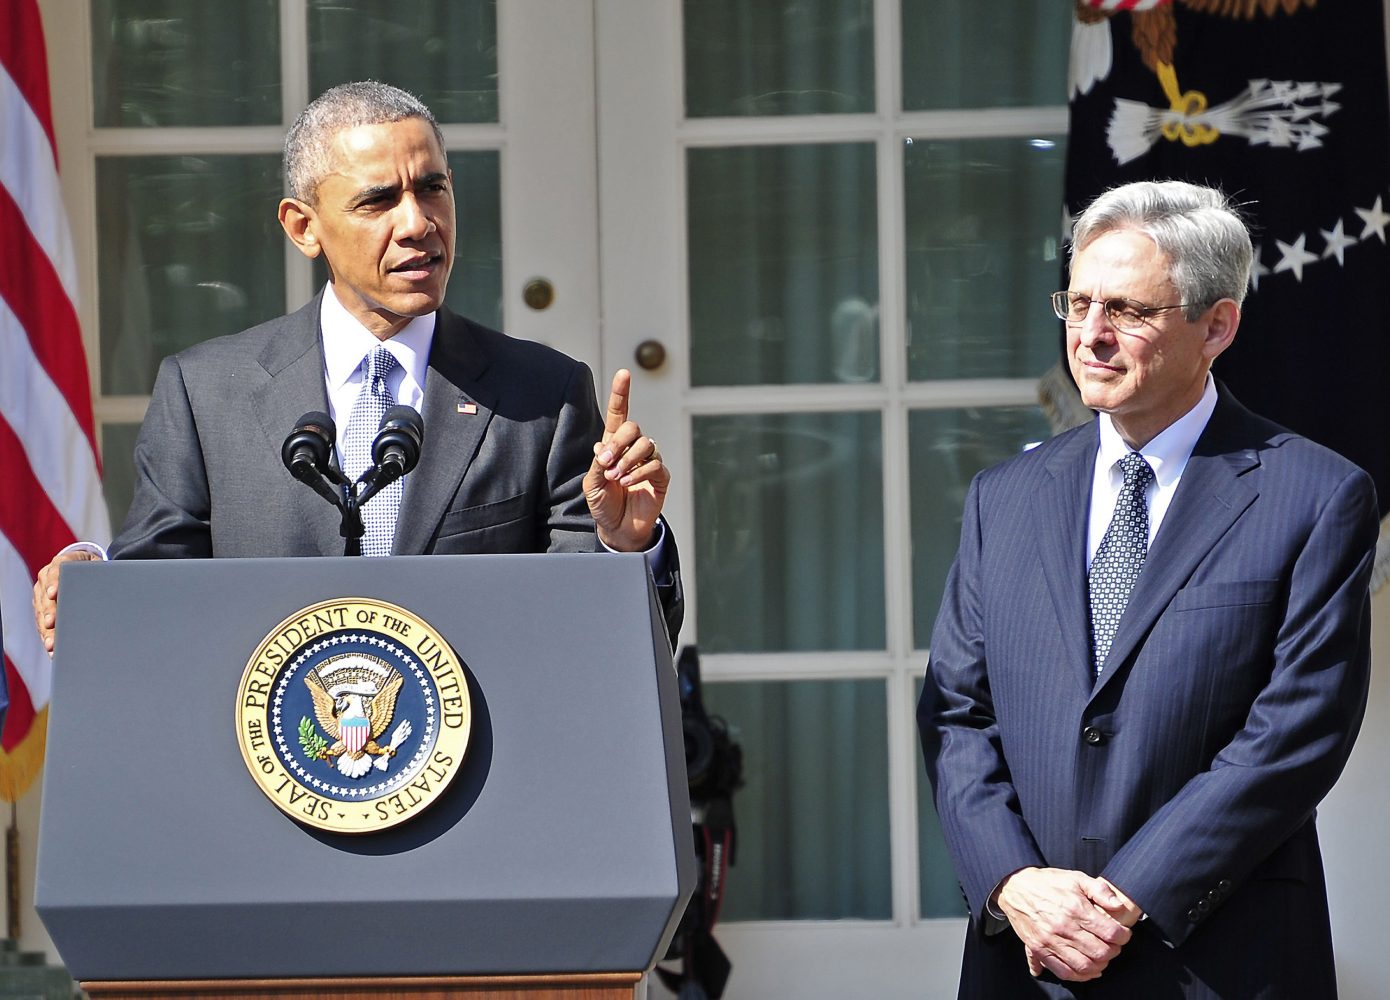 President Barack Obama, left, introduces Judge Merrick Garland, chief justice for the U.S. Court of Appeals for the District of Columbia Circuit, right, as his nominee for the Supreme Court in the Rose Garden of the White House on Wednesday, March 16, 2016. (Ron Sachs/CNP/Sipa USA/TNS)